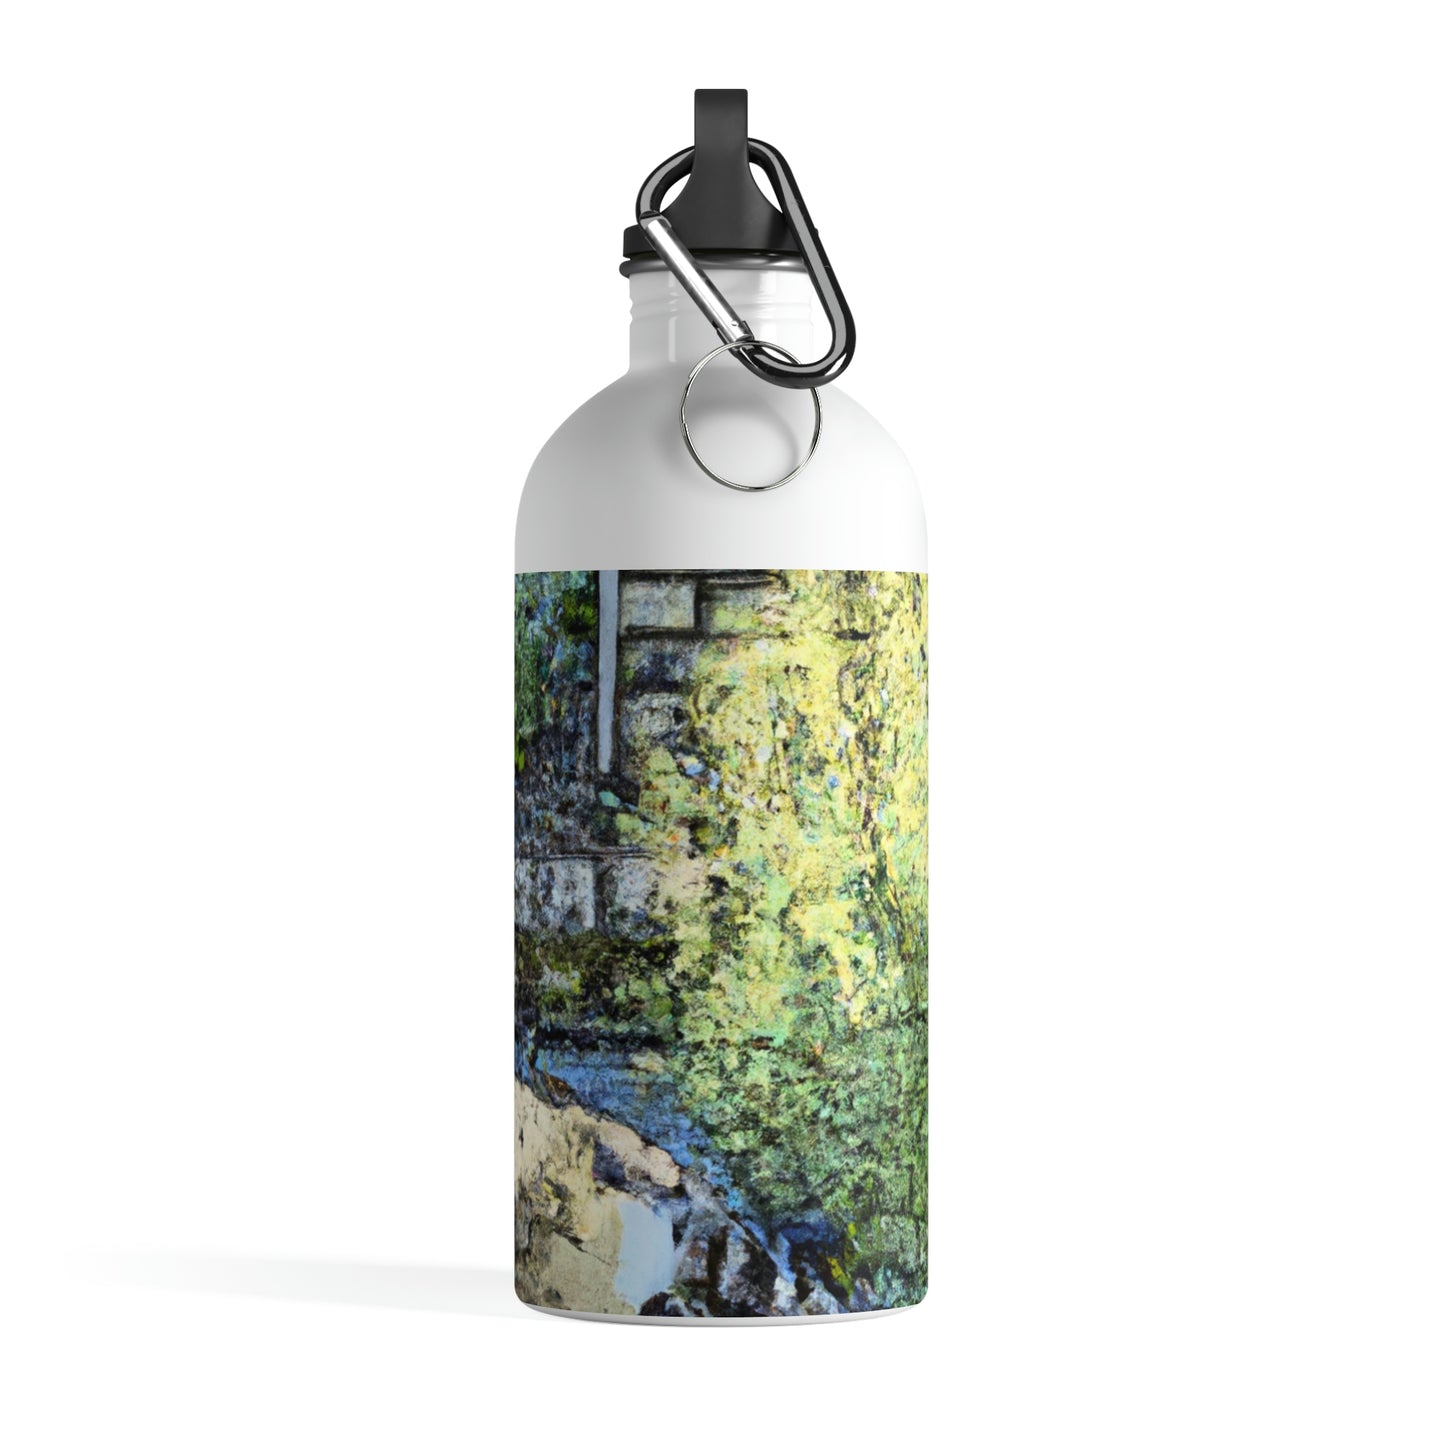 "A Cat's Life of Luxury" - The Alien Stainless Steel Water Bottle